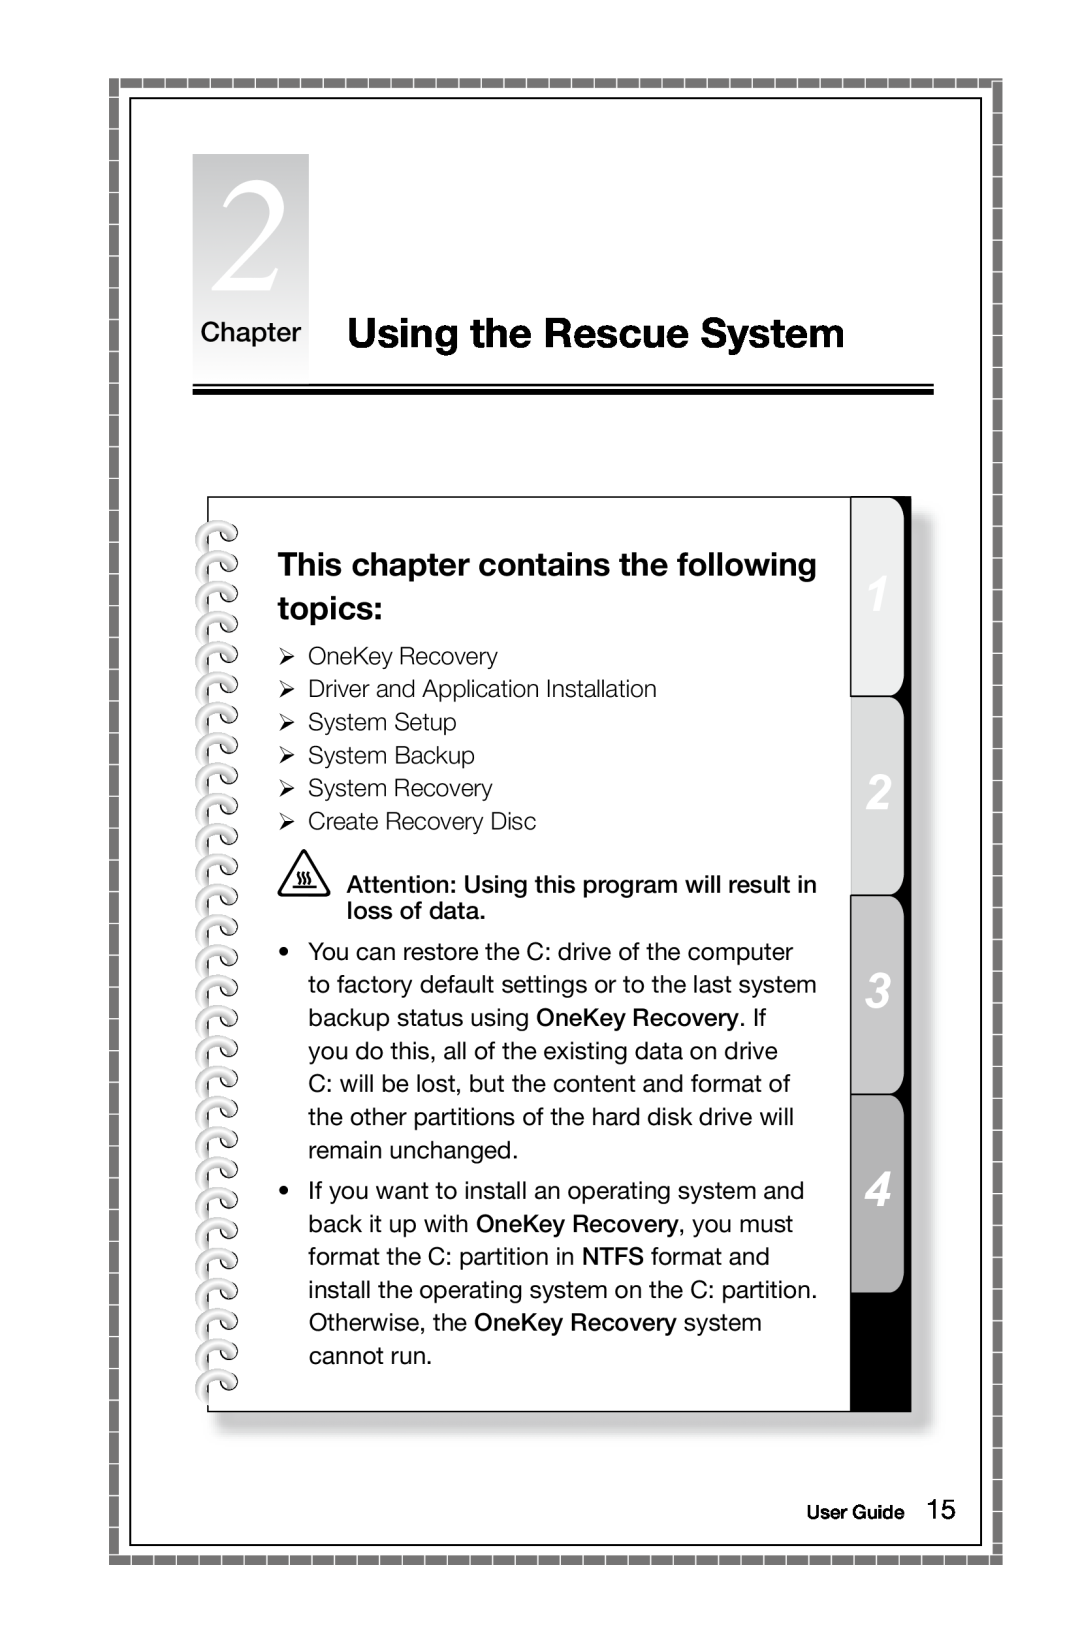 Lenovo K3 manual Chapter Using the Rescue System, This chapter contains the following topics 